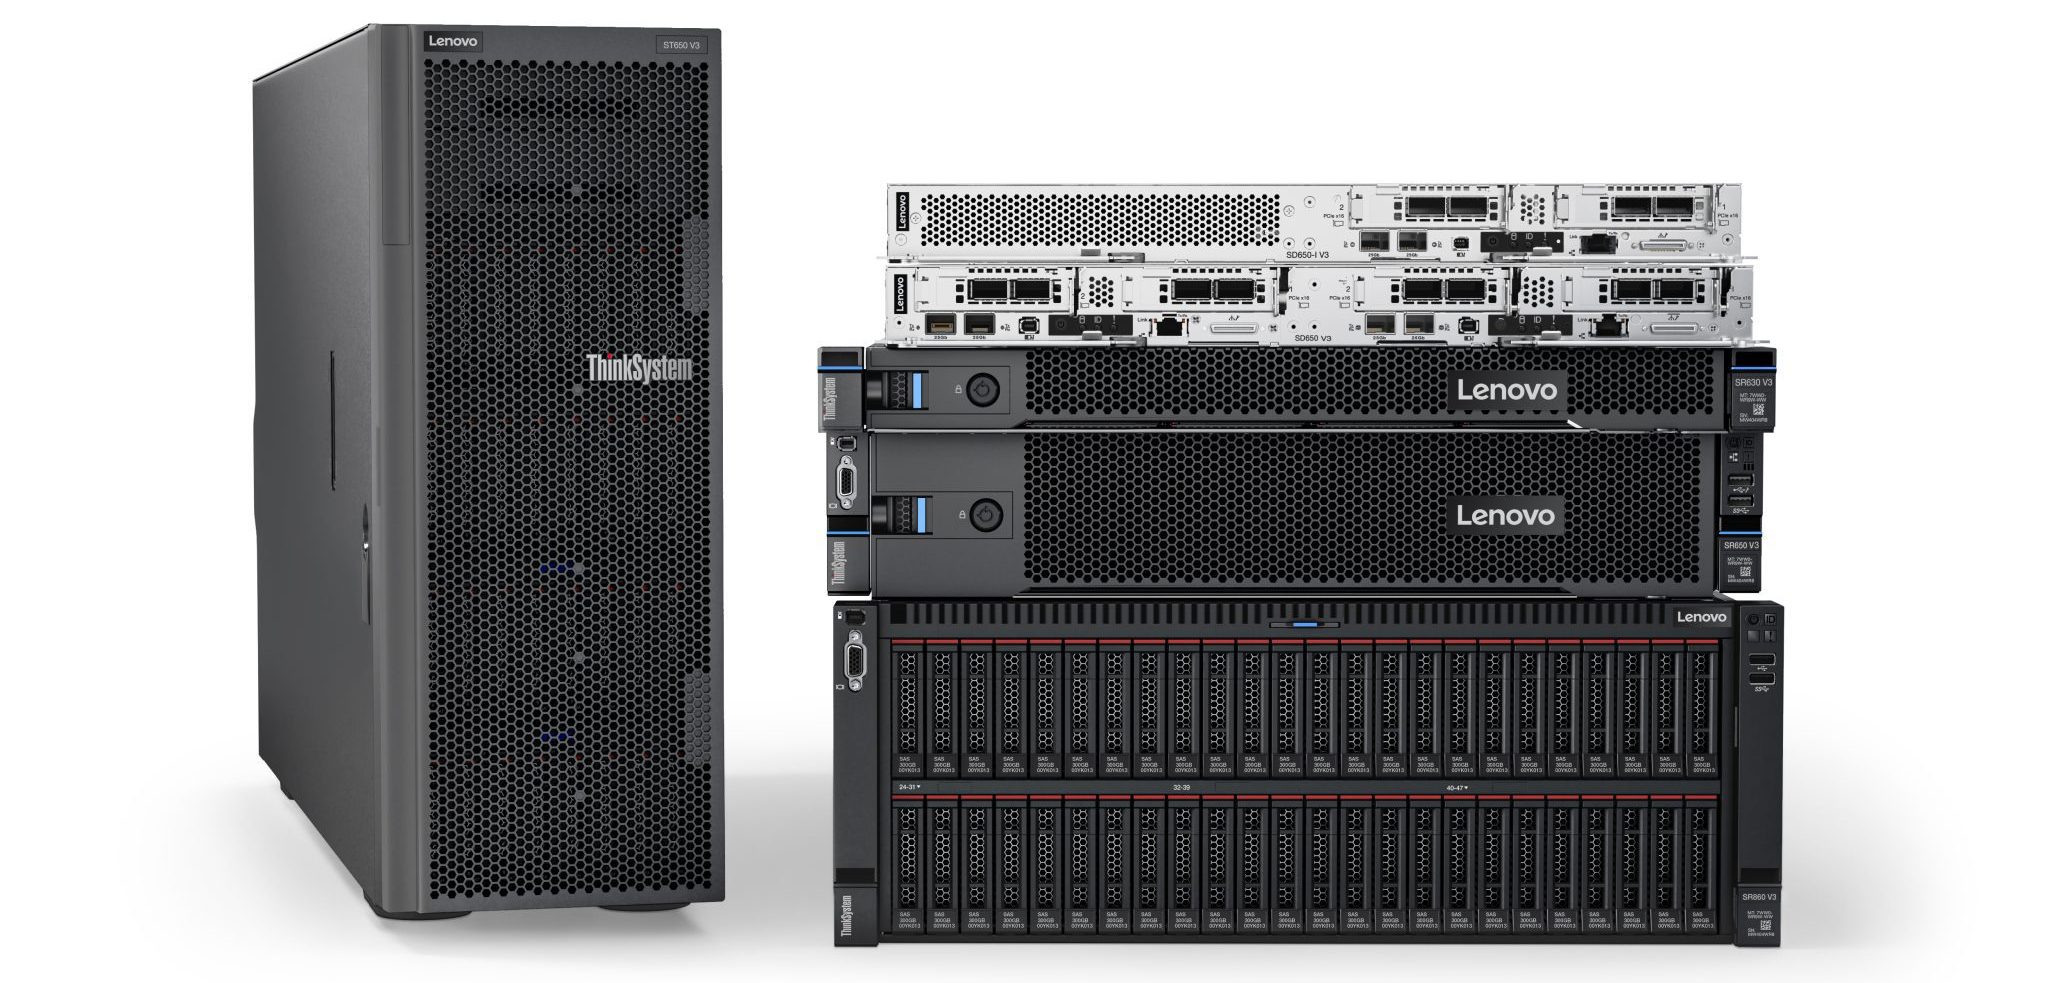 Lenovo Unveils Next Generation of Intel-Based Smart Infrastructure Solutions